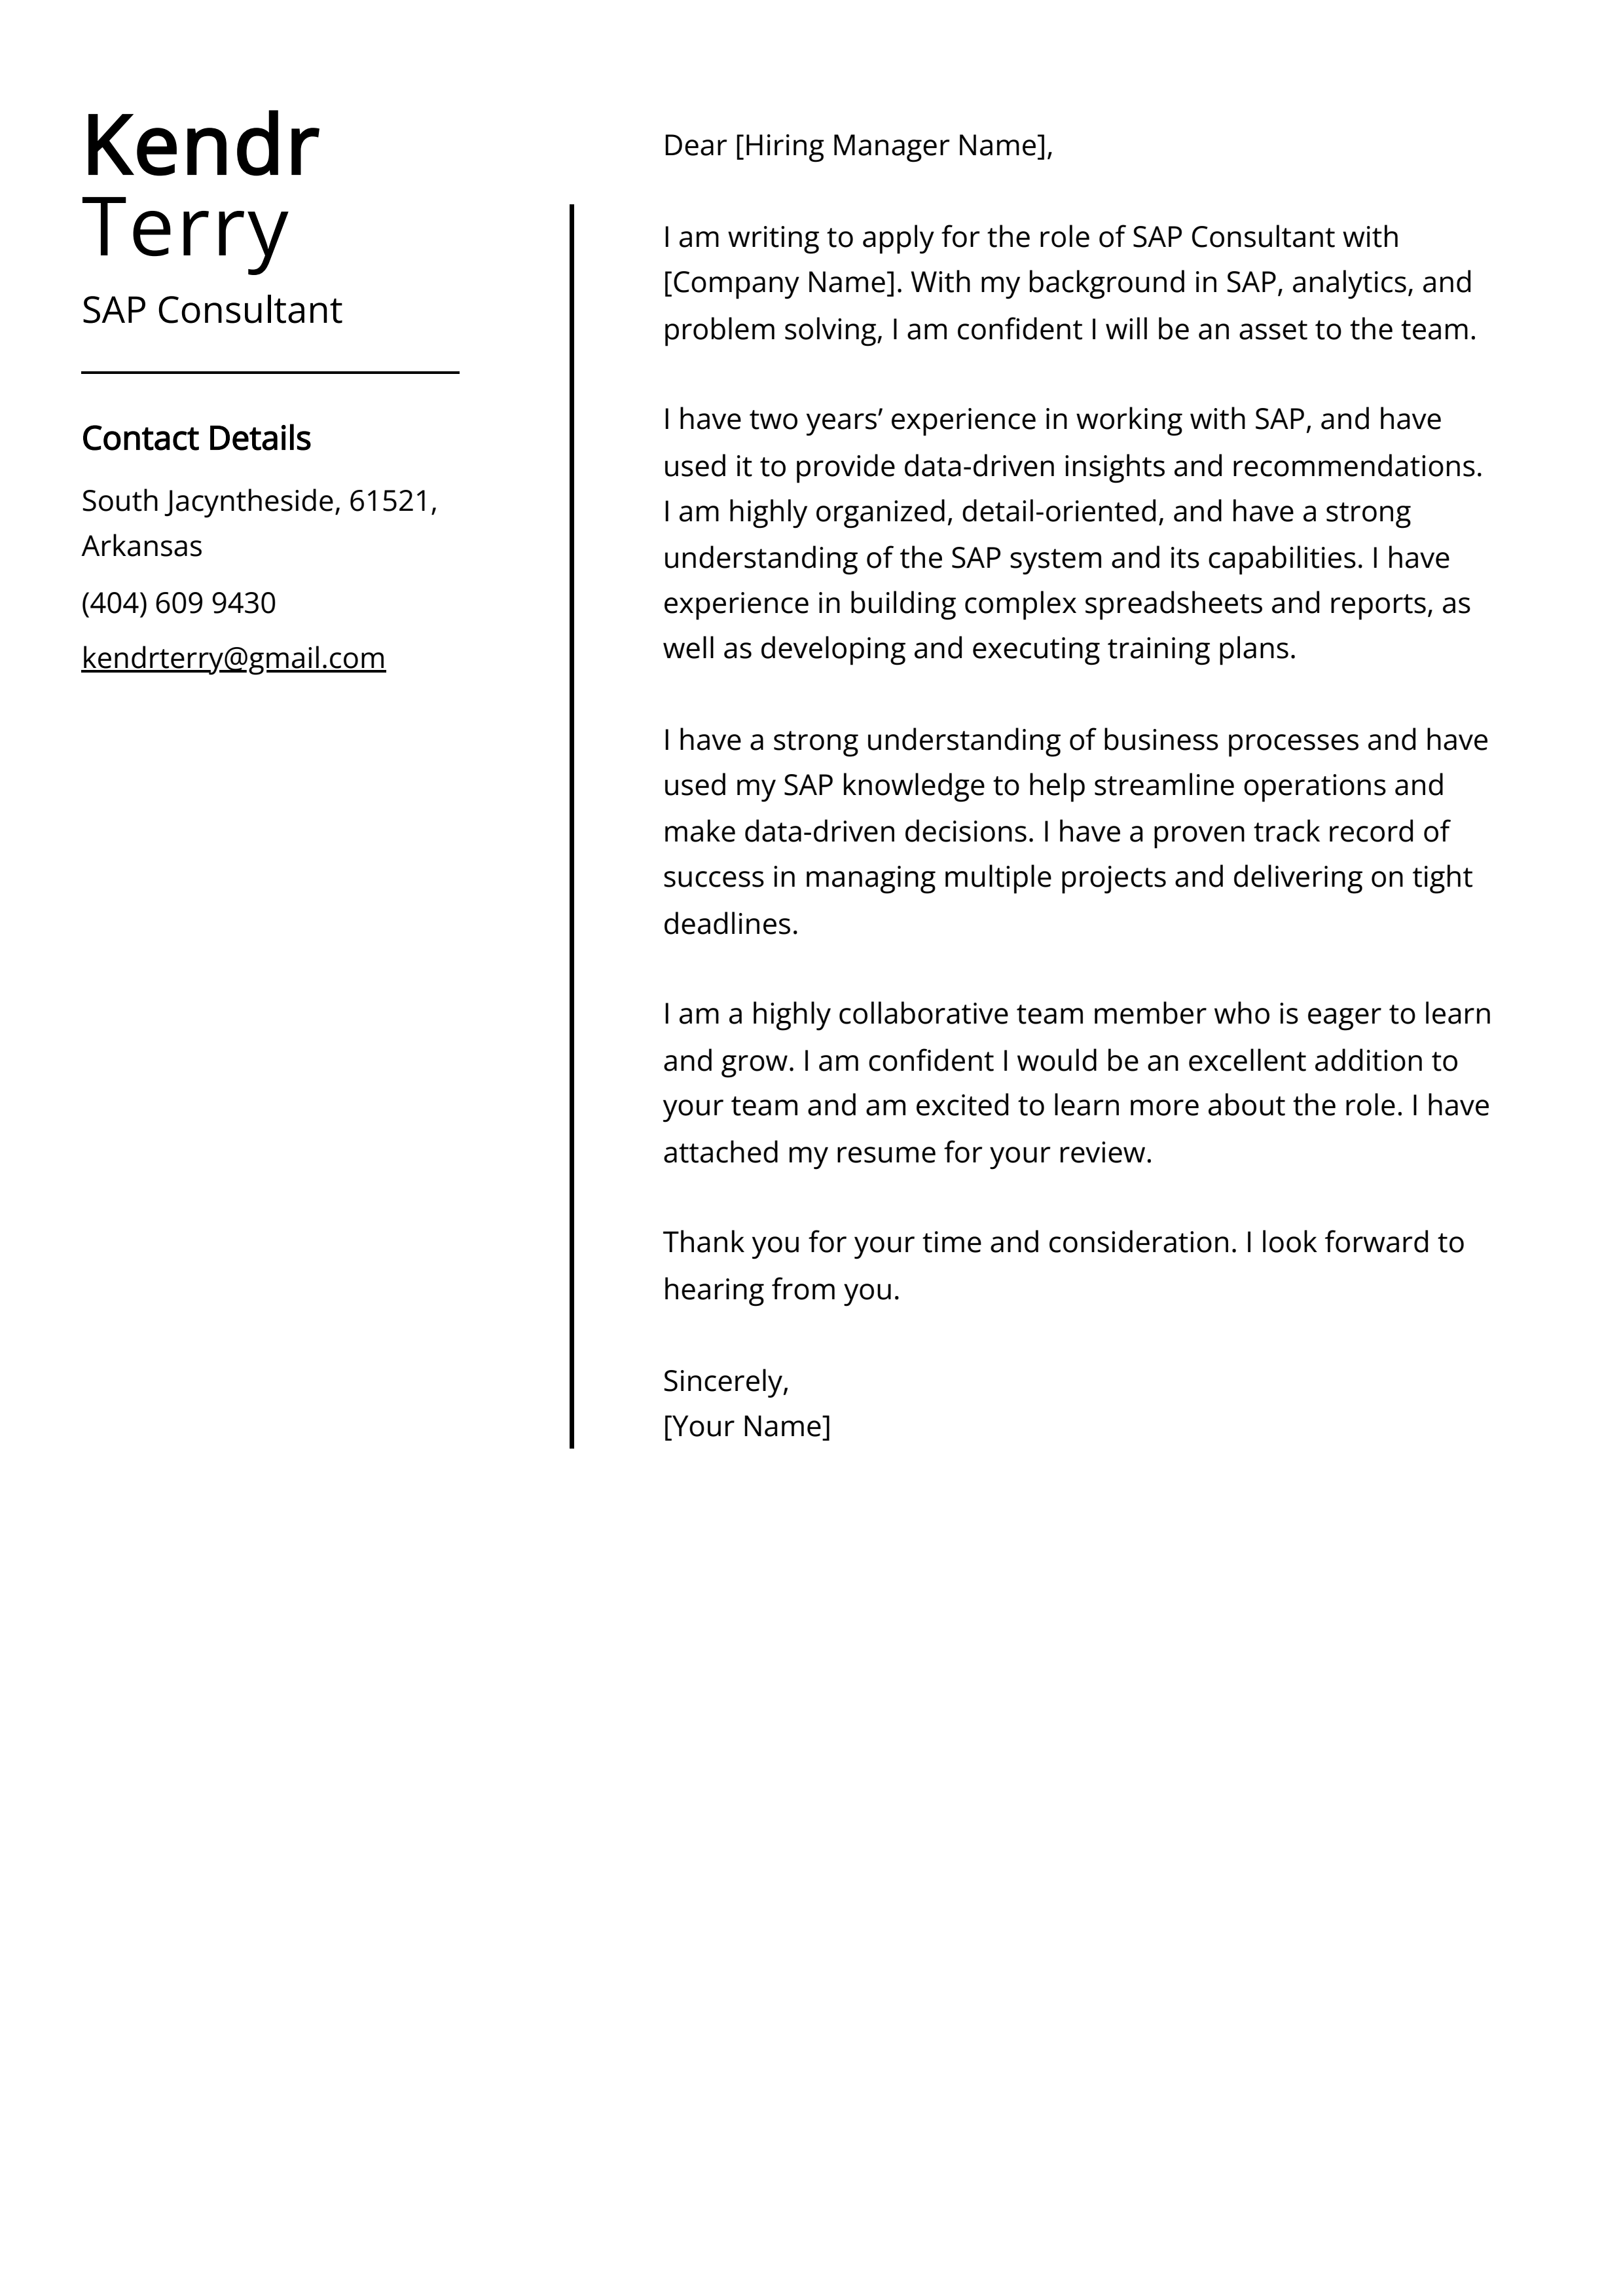 SAP Consultant Cover Letter Example